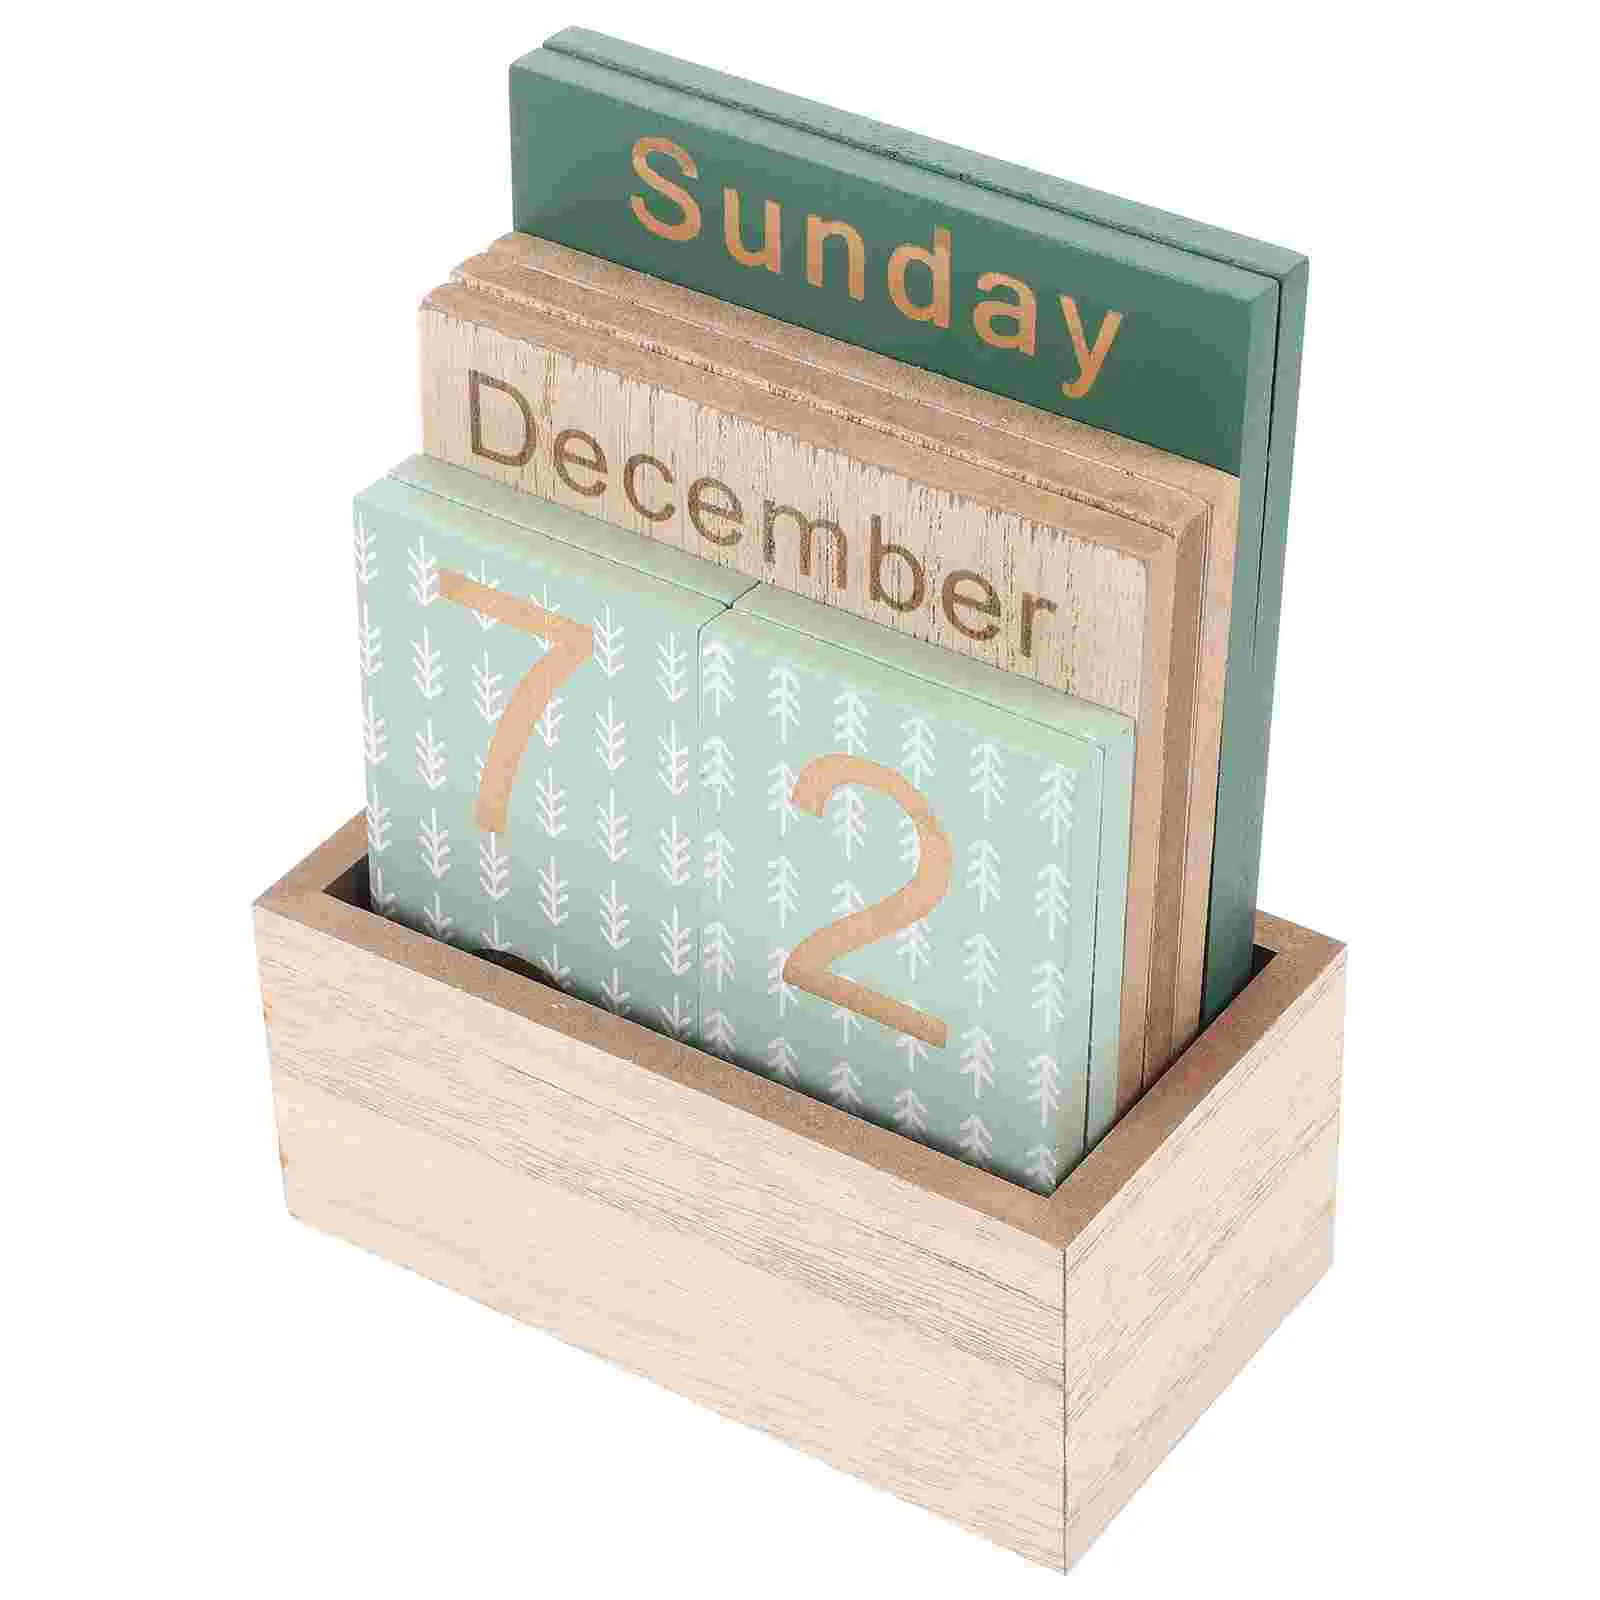 Desk Calendar Wooden Display Month Date Mini Time Planning Accessories Block Office